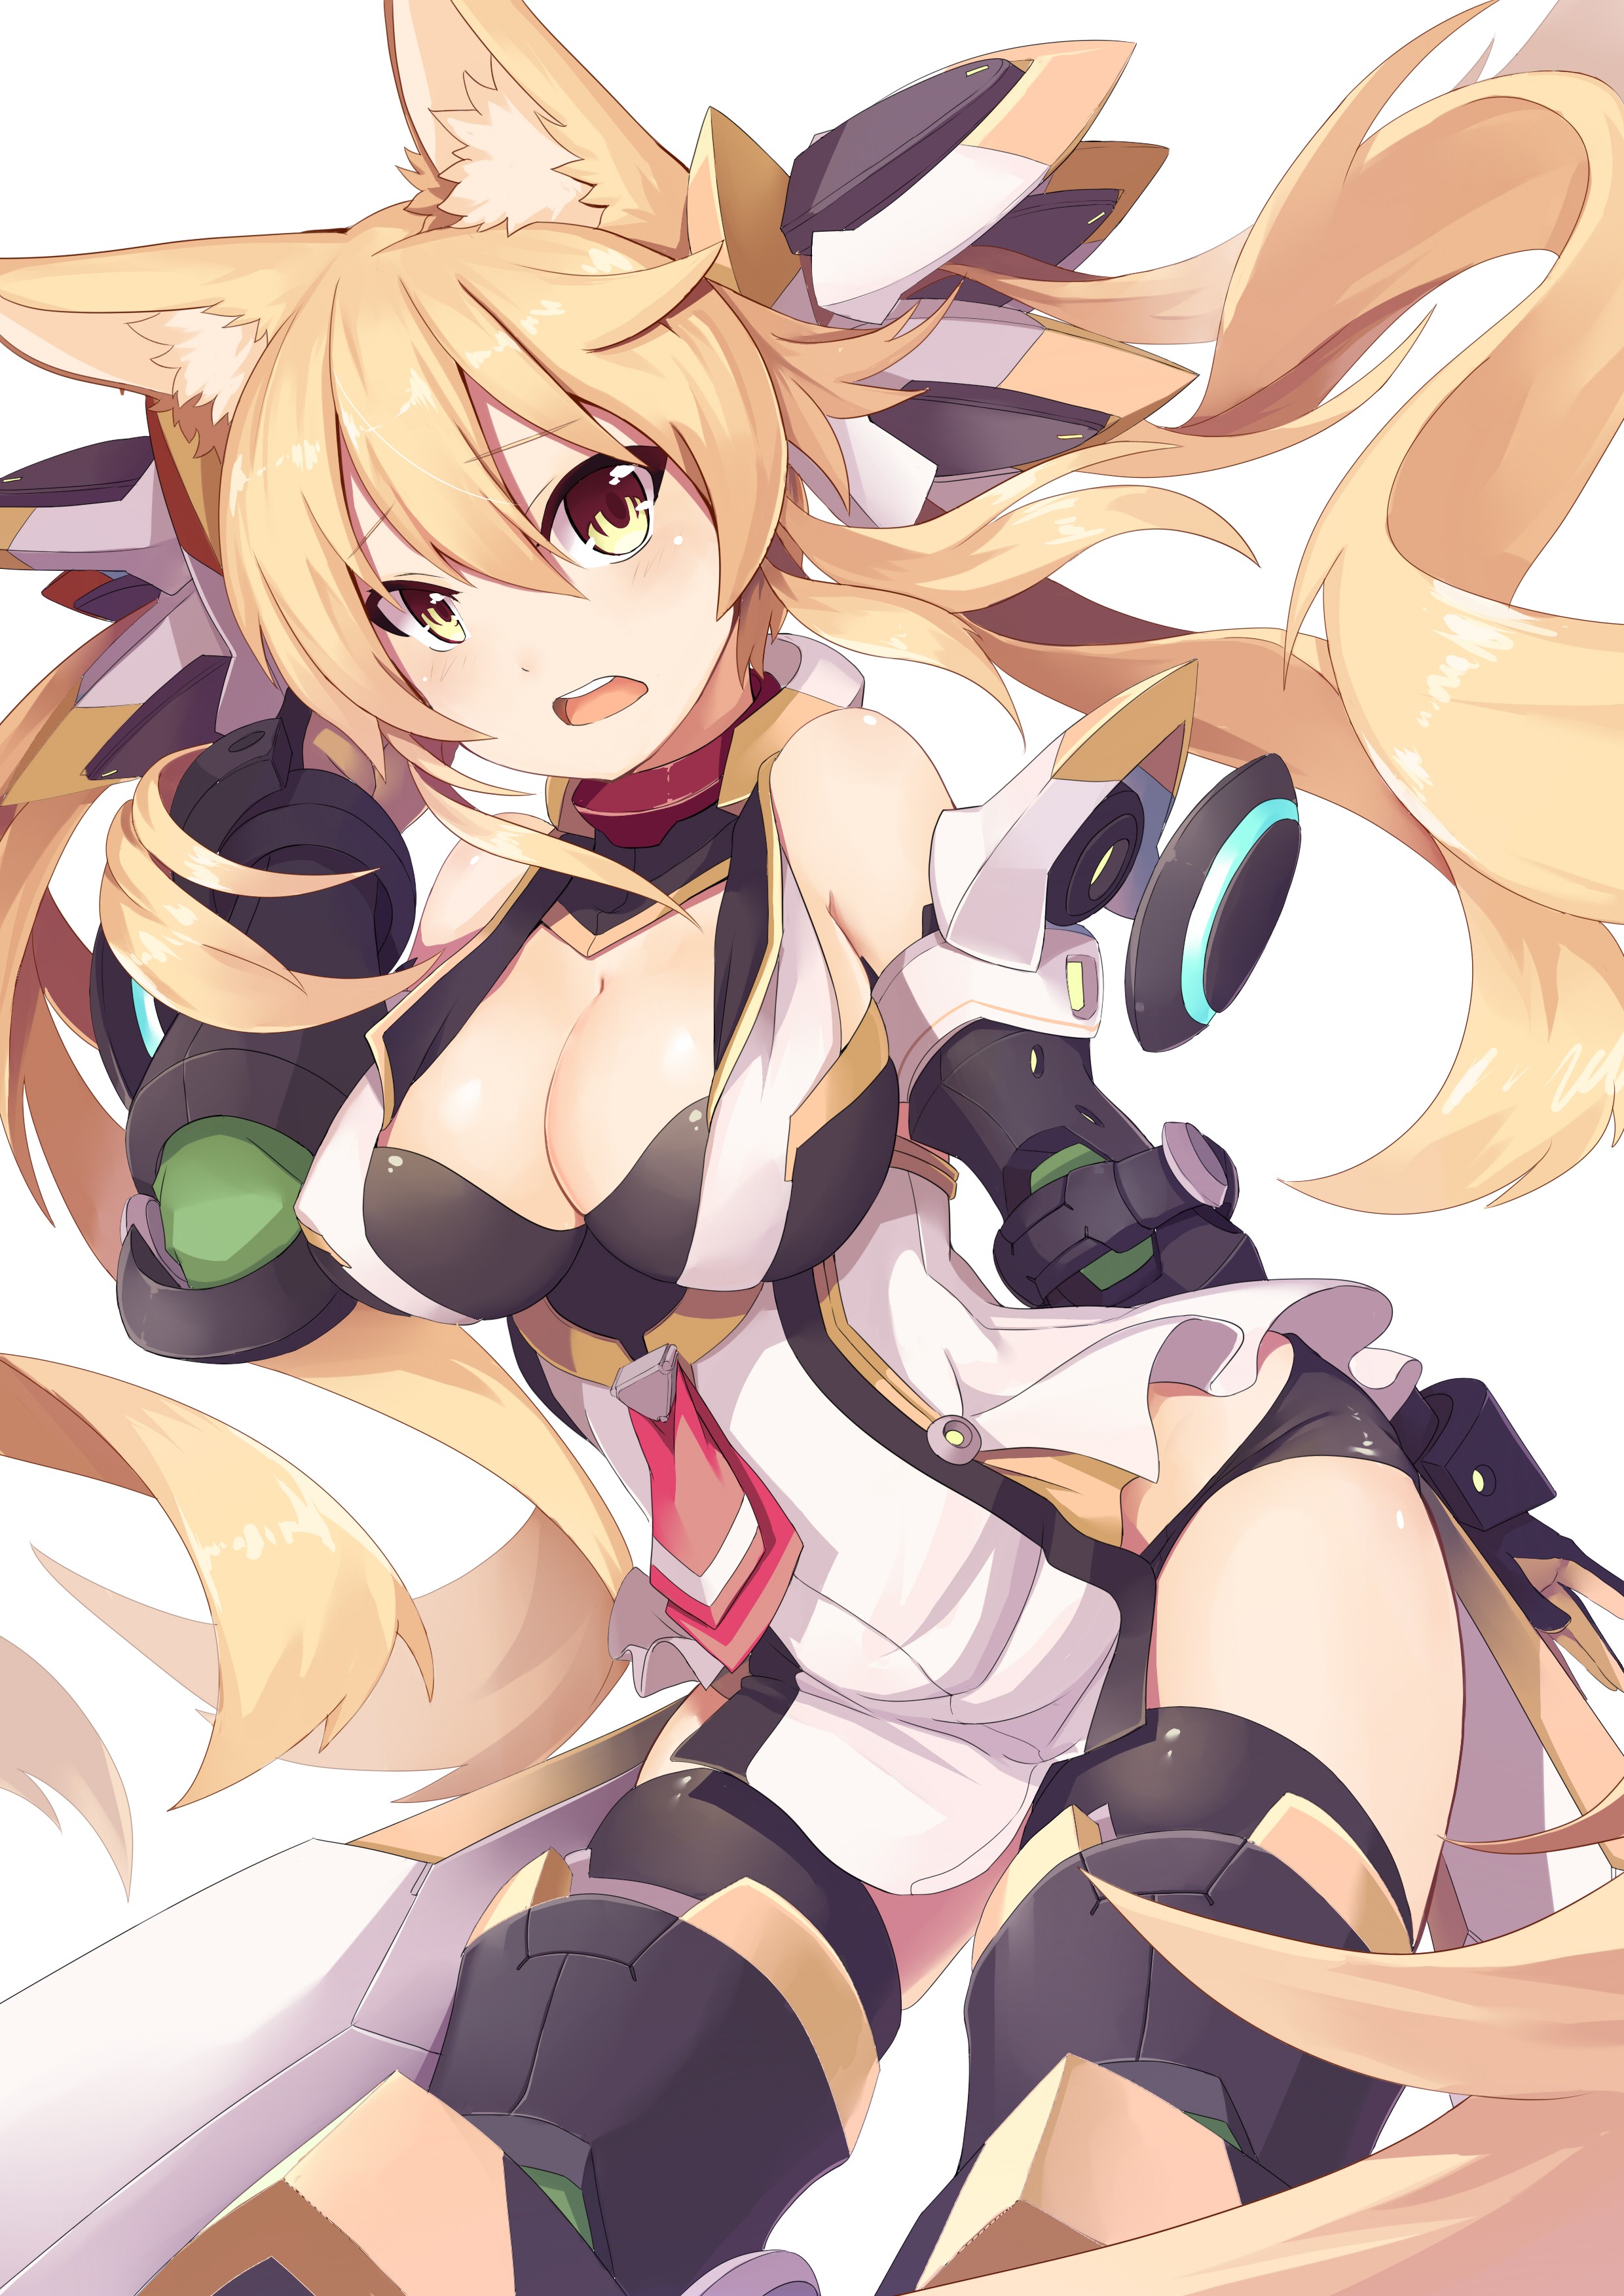 Anime 2480x3507 anime anime girls animal ears cleavage tail long hair blonde yellow eyes open shirt Jie Laite original characters Pixiv boobs big boobs curvy looking at viewer hair in face